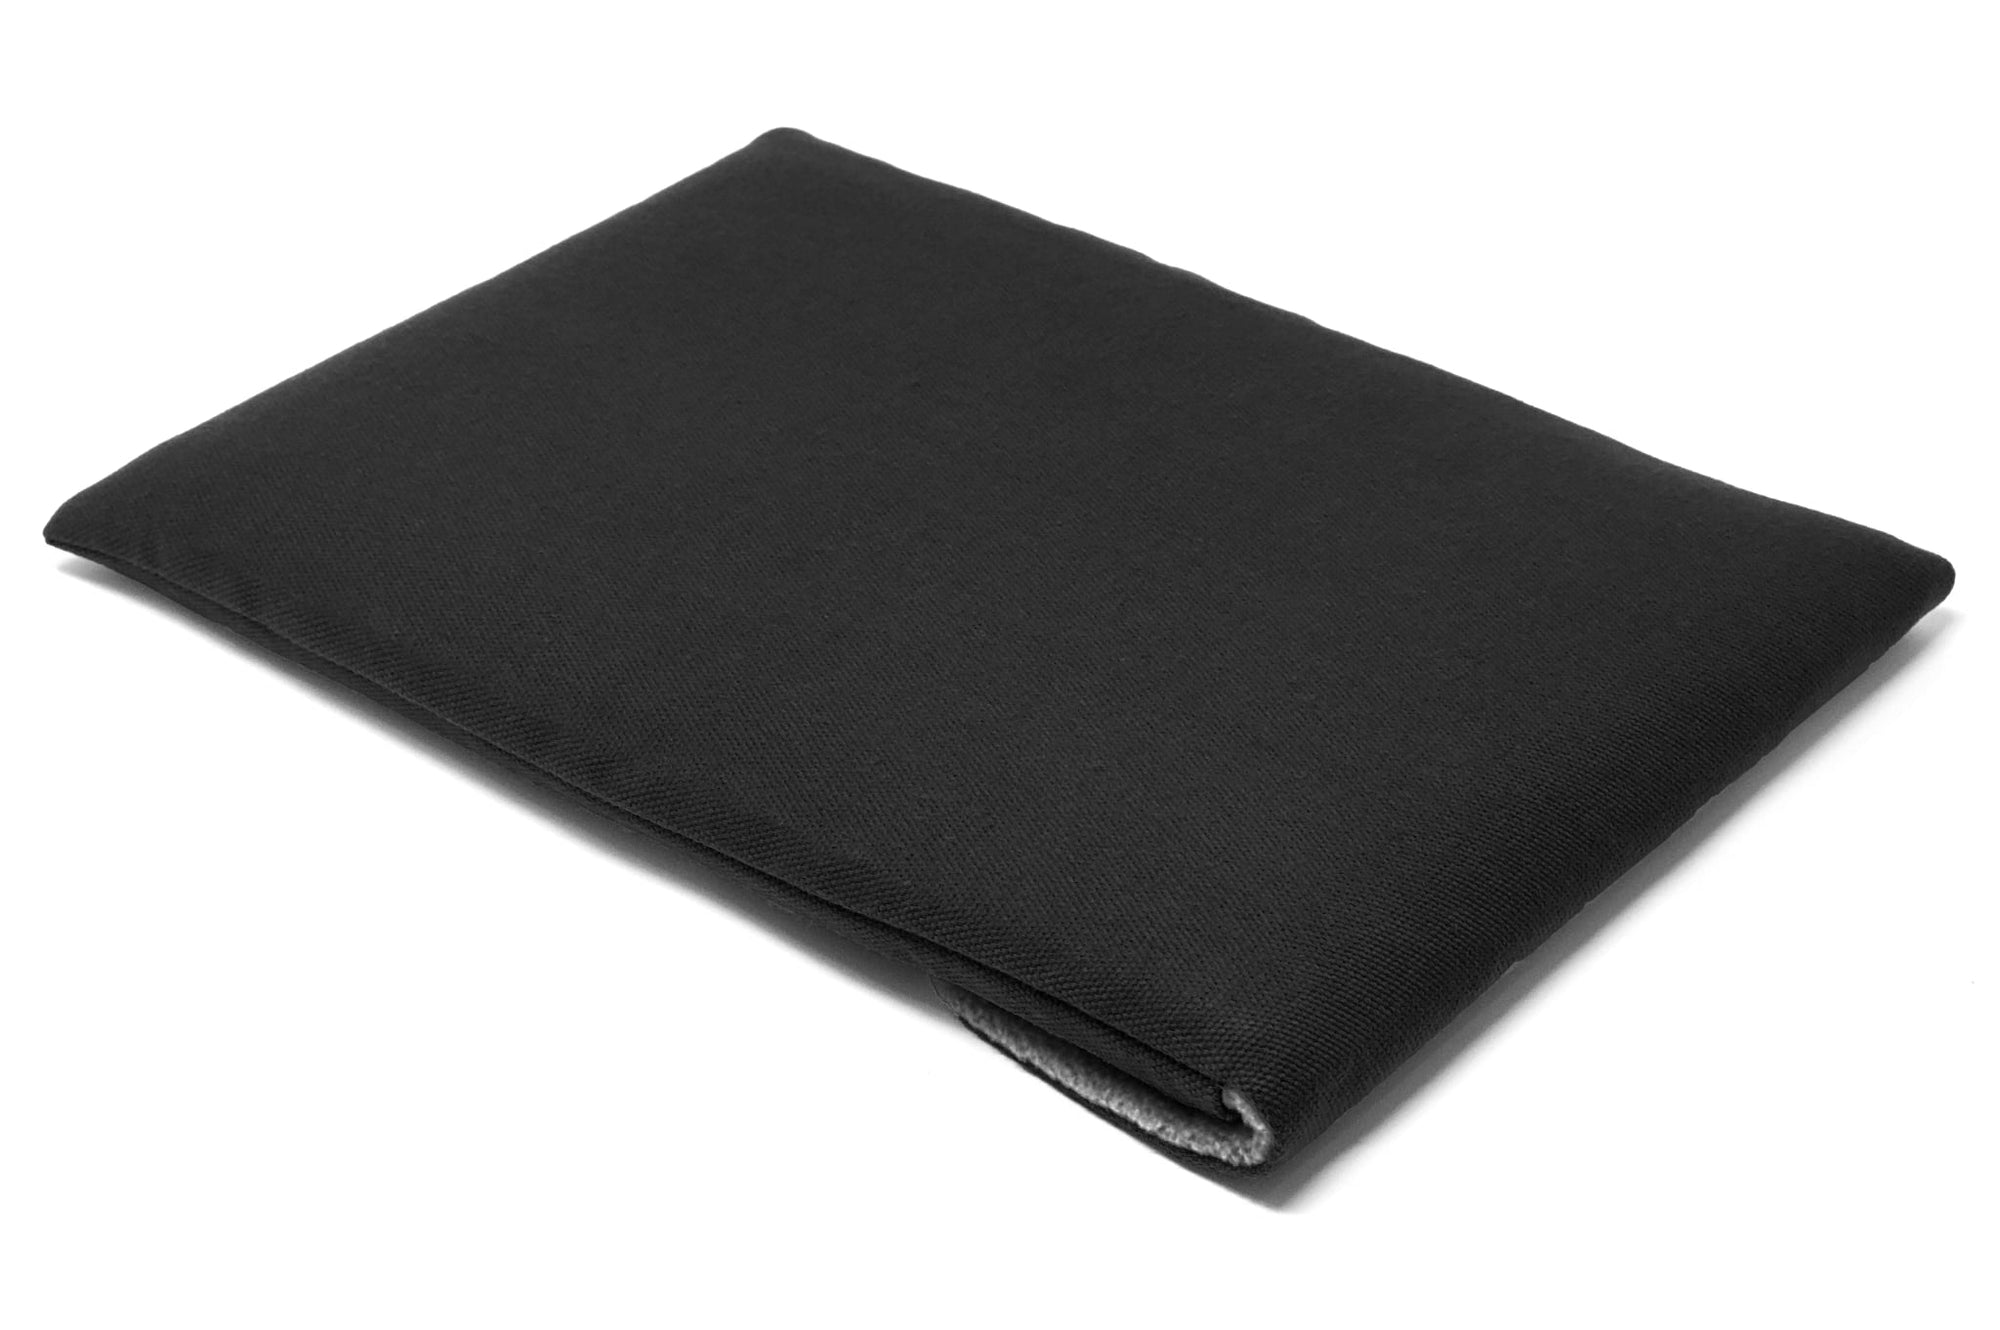 Framework Laptop 16 Sleeve Case - Pioneer Canvas (Special Edition)